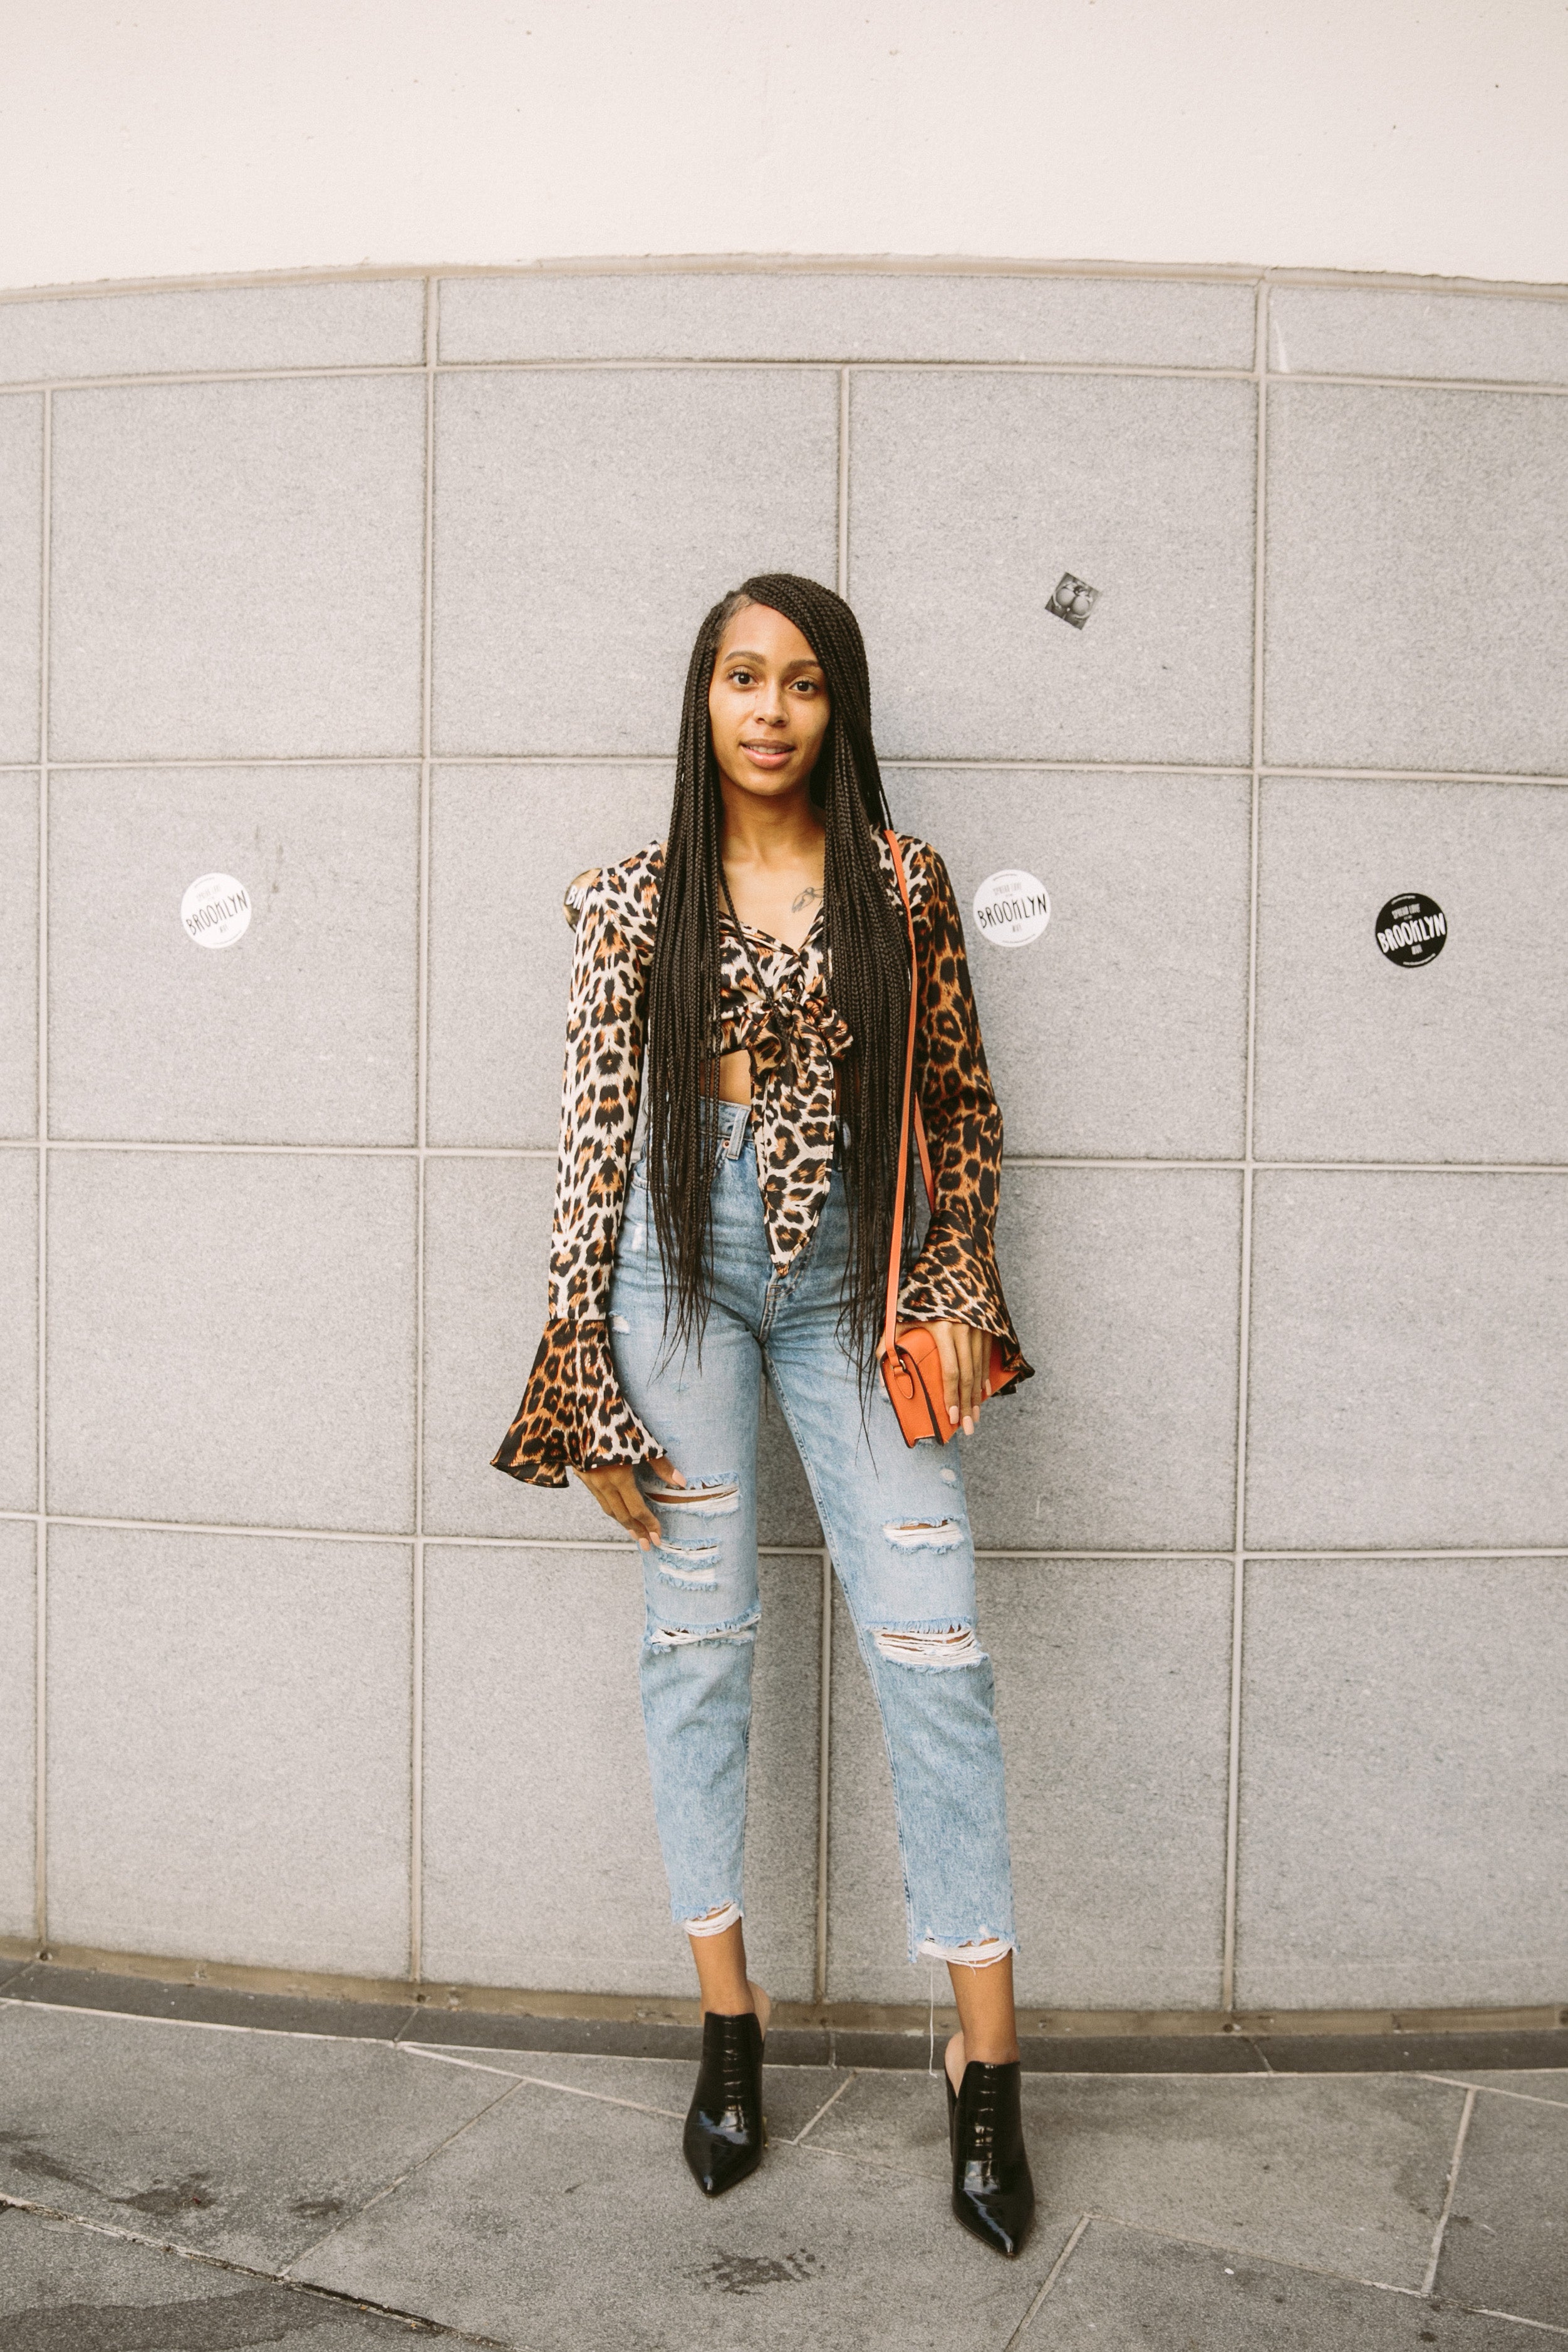 The Best Street Style At Atlanta's A3C Festival